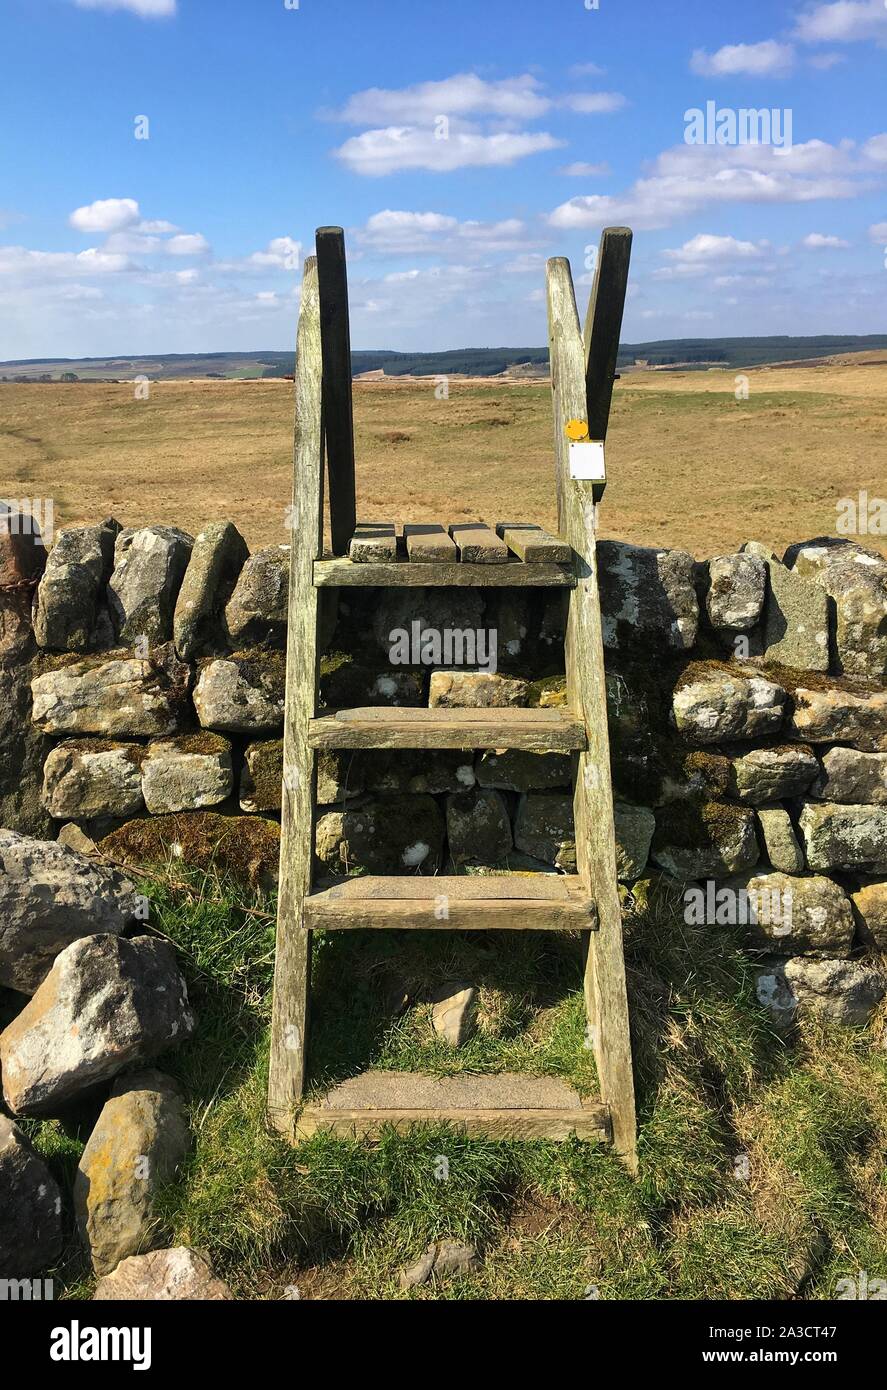 Wooden ladder stile over dry stone wall, on foot path at Haydon Bridge near Hadrians Wall, Northumberland National Park. Stock Photo